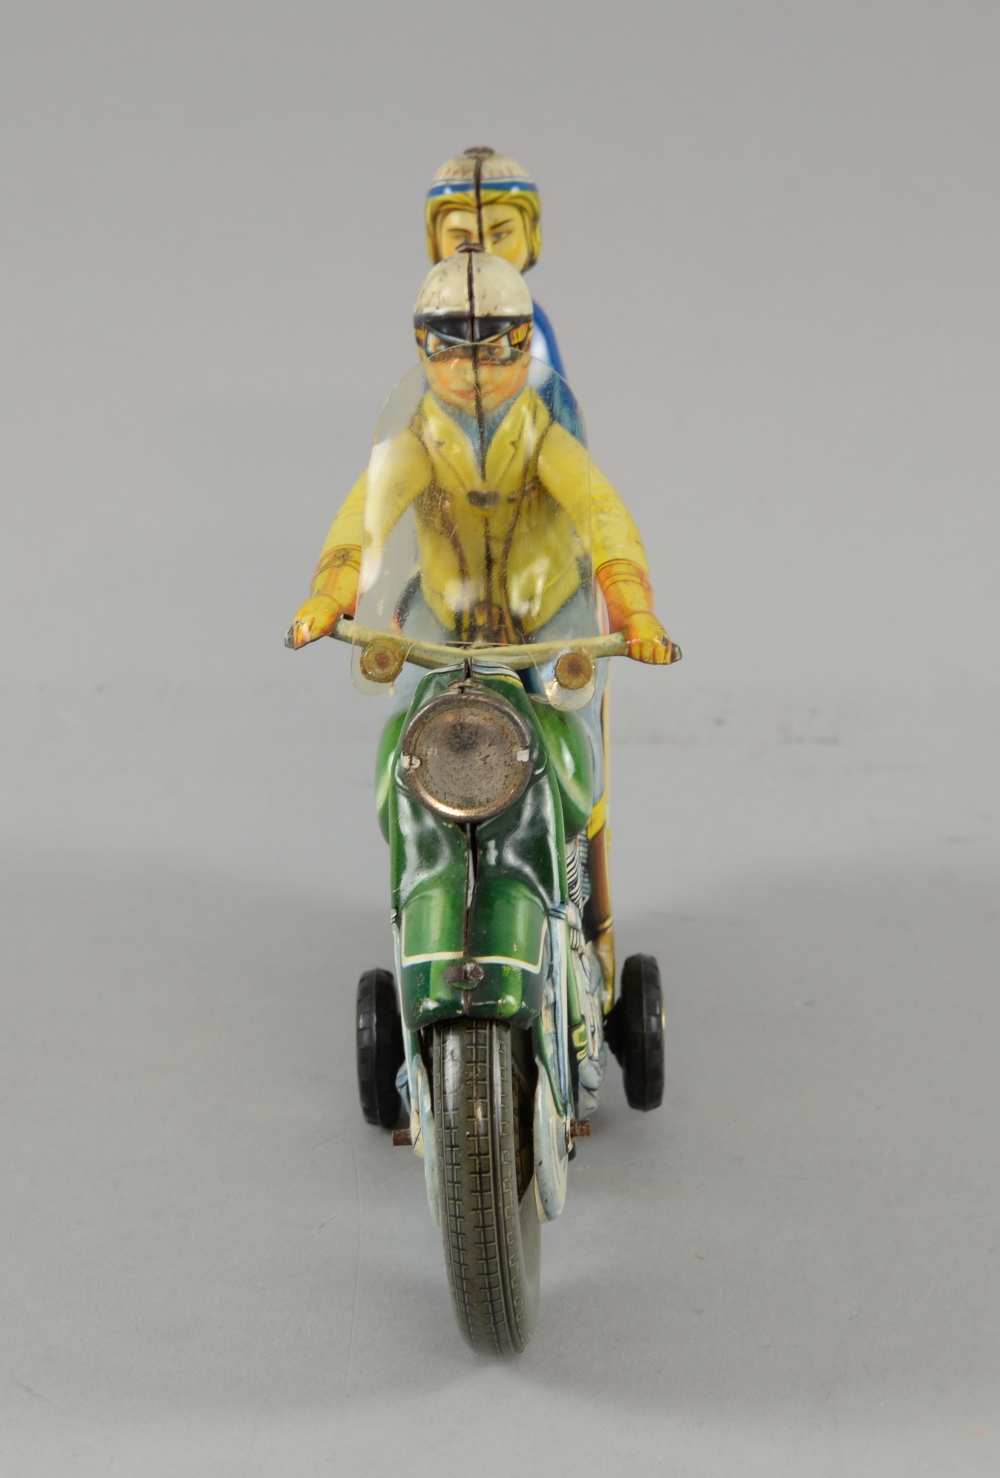 Tippco, Germany , tinplate, 1950s Harley Davidson friction driven motorcycle with rider and - Image 3 of 4